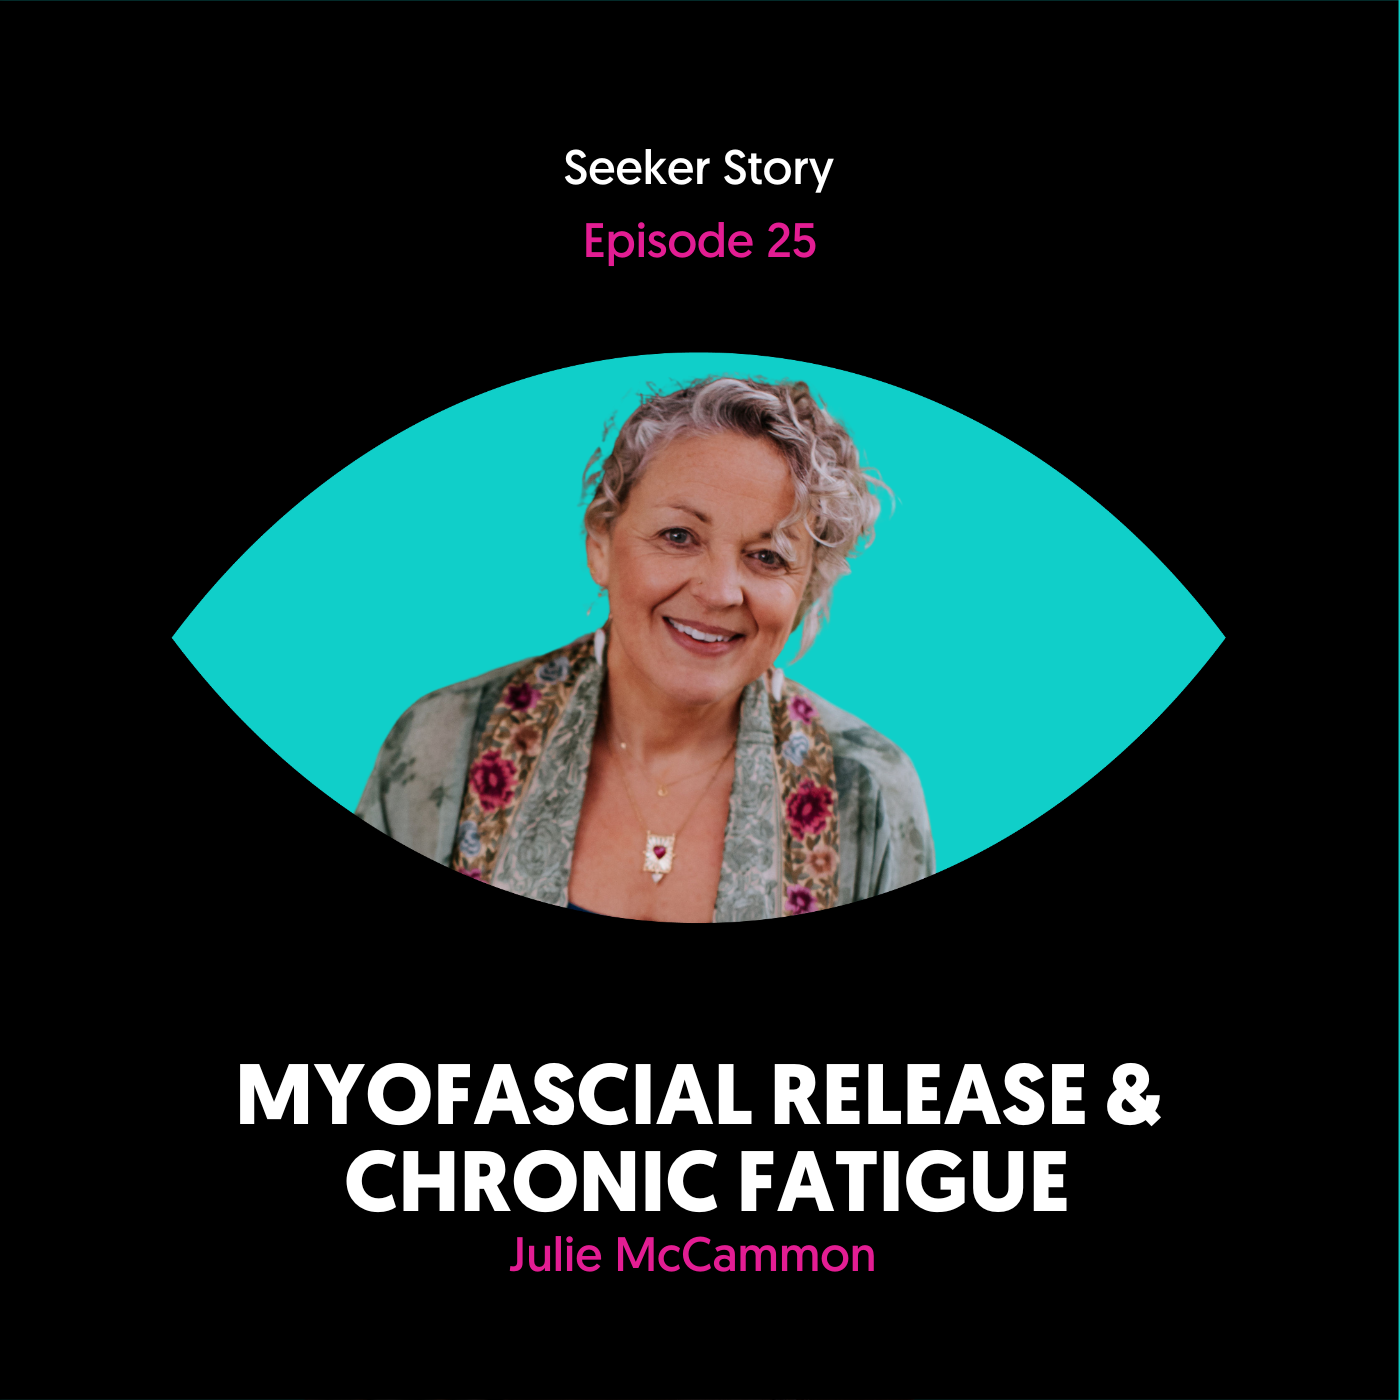 Myofascial Release and Chronic Fatigue with Julie McCammon